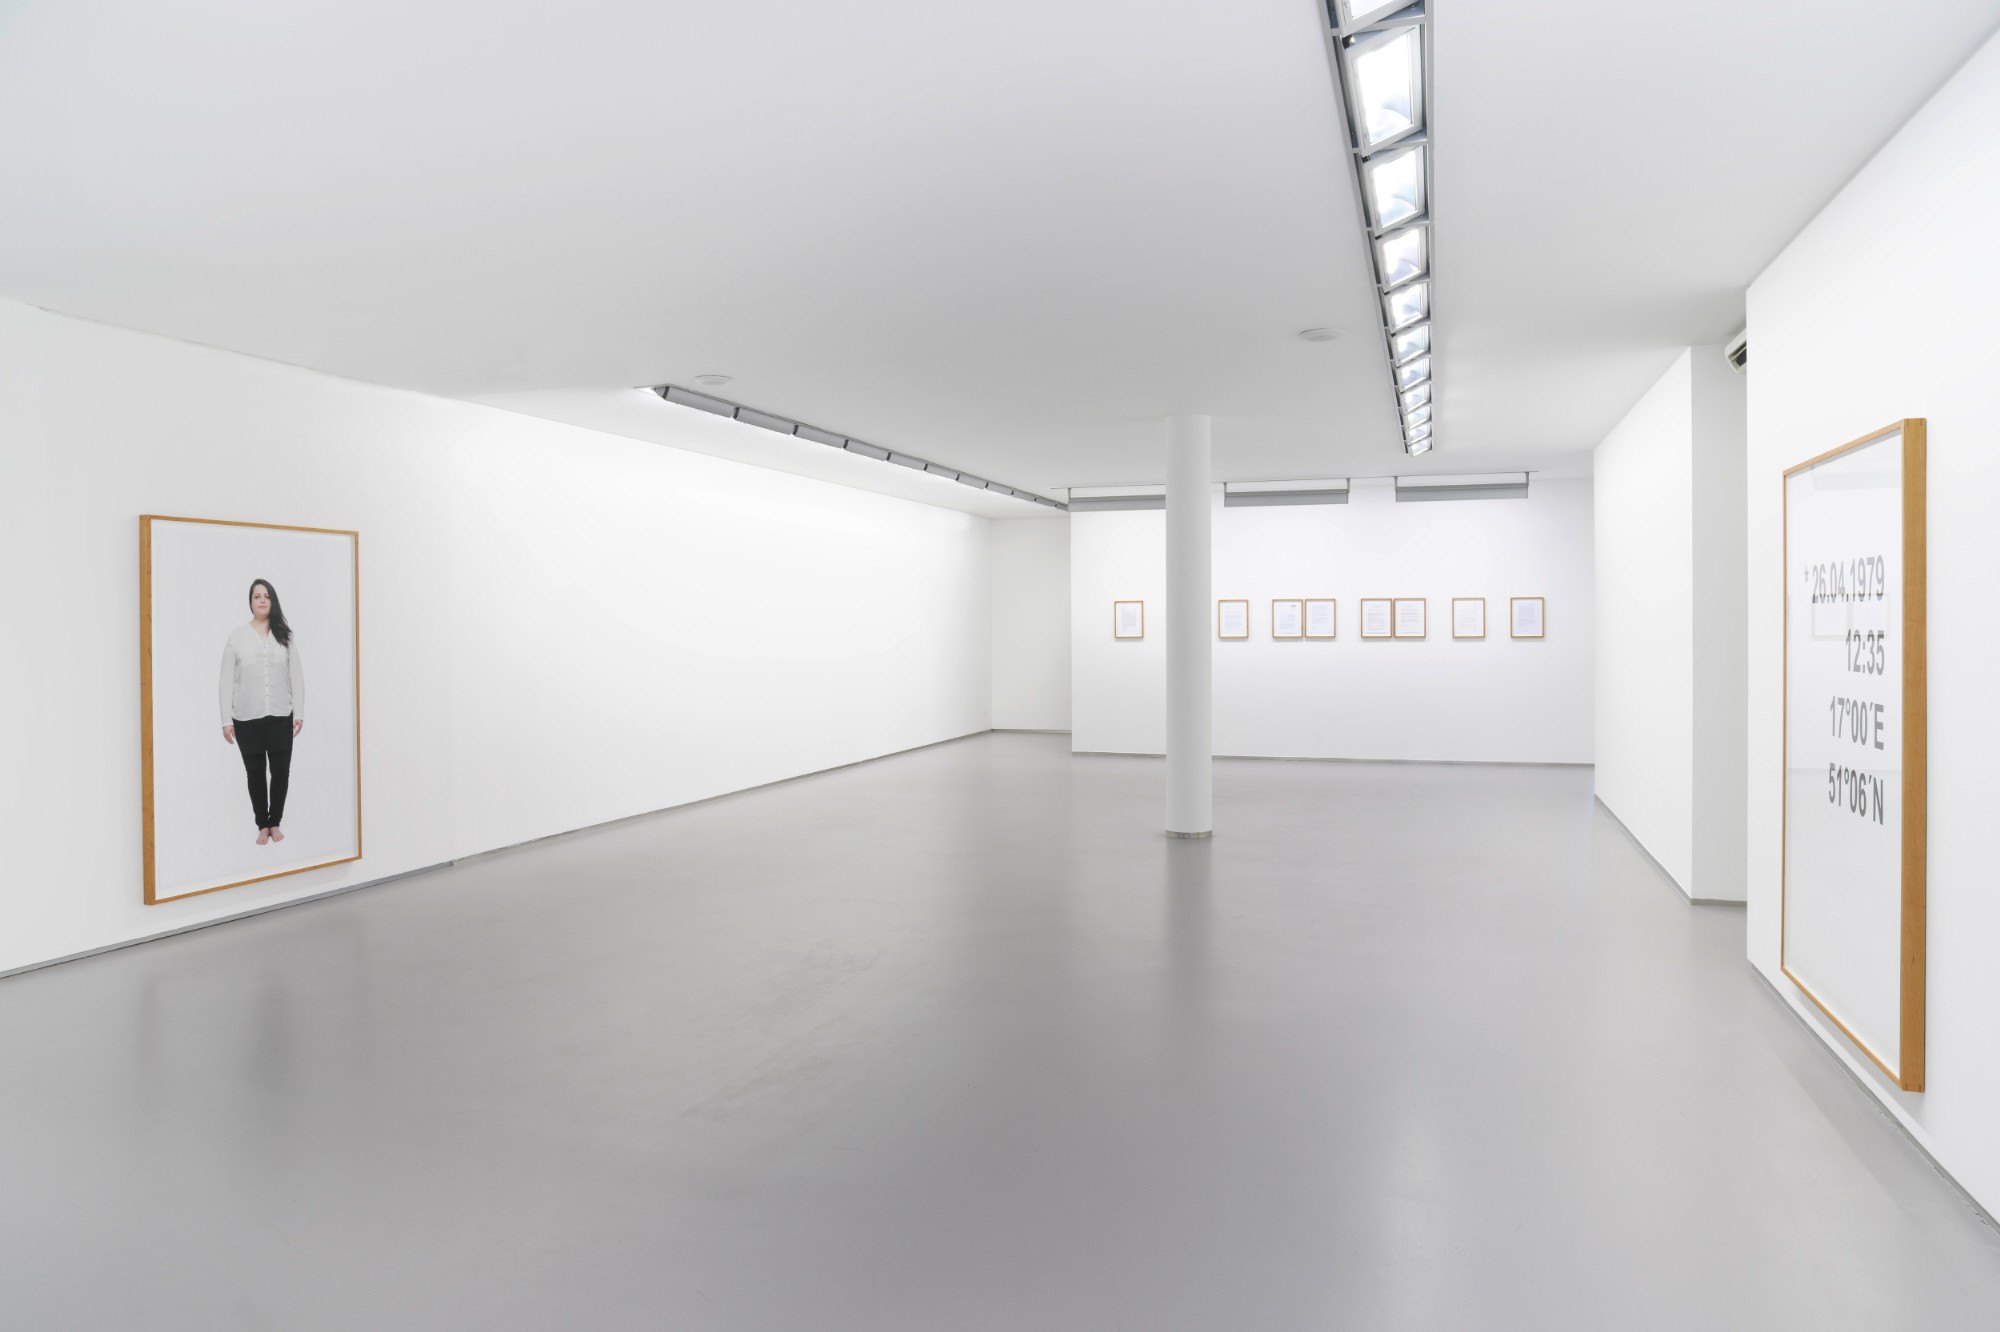 Patrycja German, 26.04.1979, 12:35 Uhr, 1°00 E, 51°06  N, Exhibition view, 2016